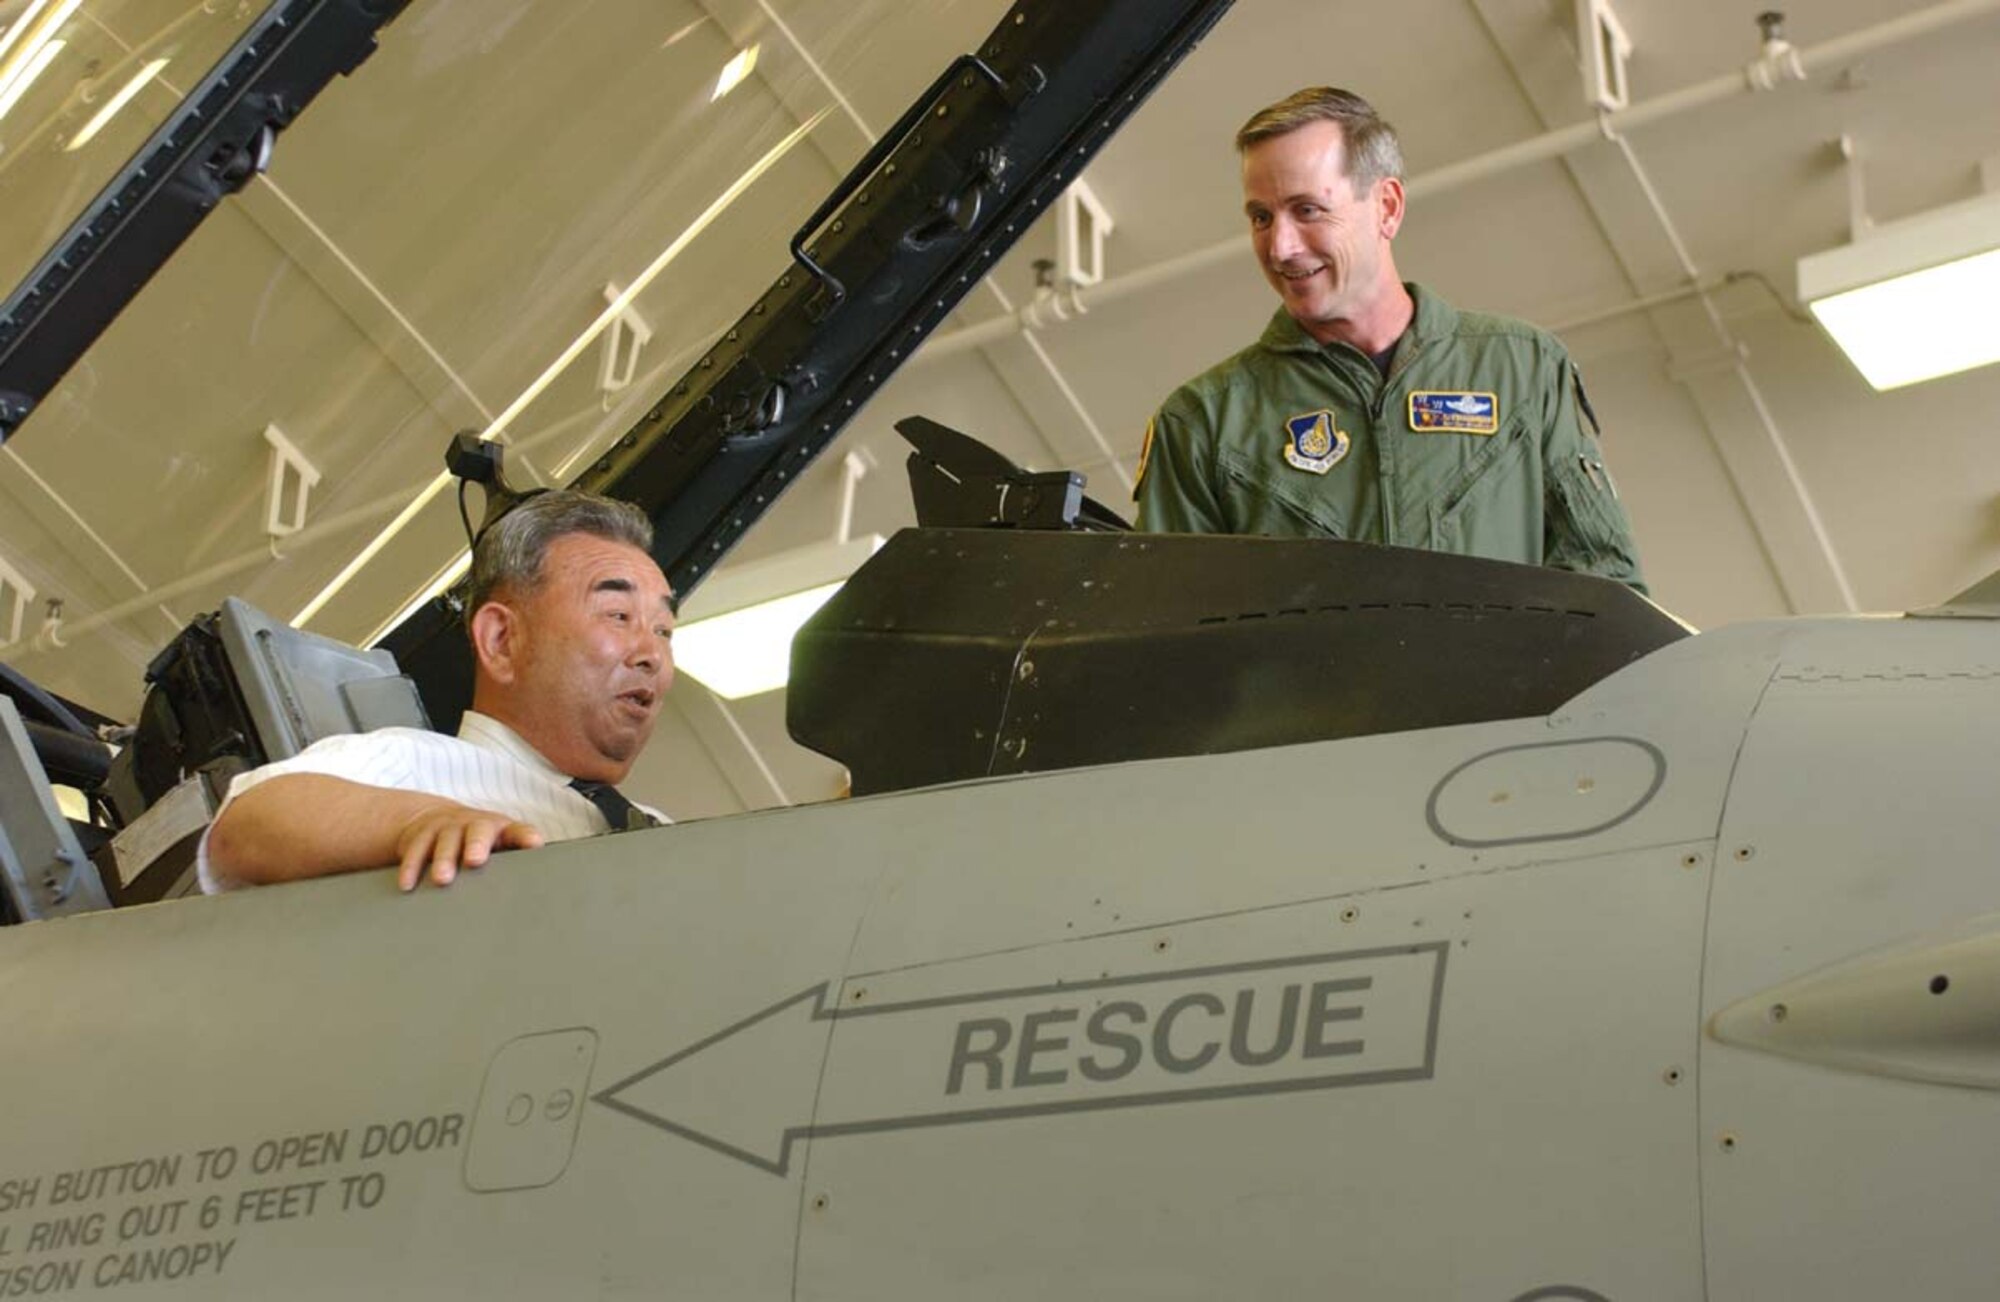 MISAWA AIR BASE, Japan -- Mayor Kazumasa Taneichi, the new Misawa City maor, is treated to a seat in the cockpit of the 35th Fighter Wing Commander Col. Terrence O'Shaughnessy's (right) F-16 Fighting Falcon July 26. After 67 years of living next door, the mayor set foot on the the base for the first time. The mayor received a tour of the flightline, fire station, new dorms, and Grissom Dining Facility. The mayor then enjoyed lunch at the Officer's Club with base leadership and gained a better understanding of 35th Fighter Wing's mission. (U.S. Air Force photo by Airman 1st Class Benjamin Wilson)
